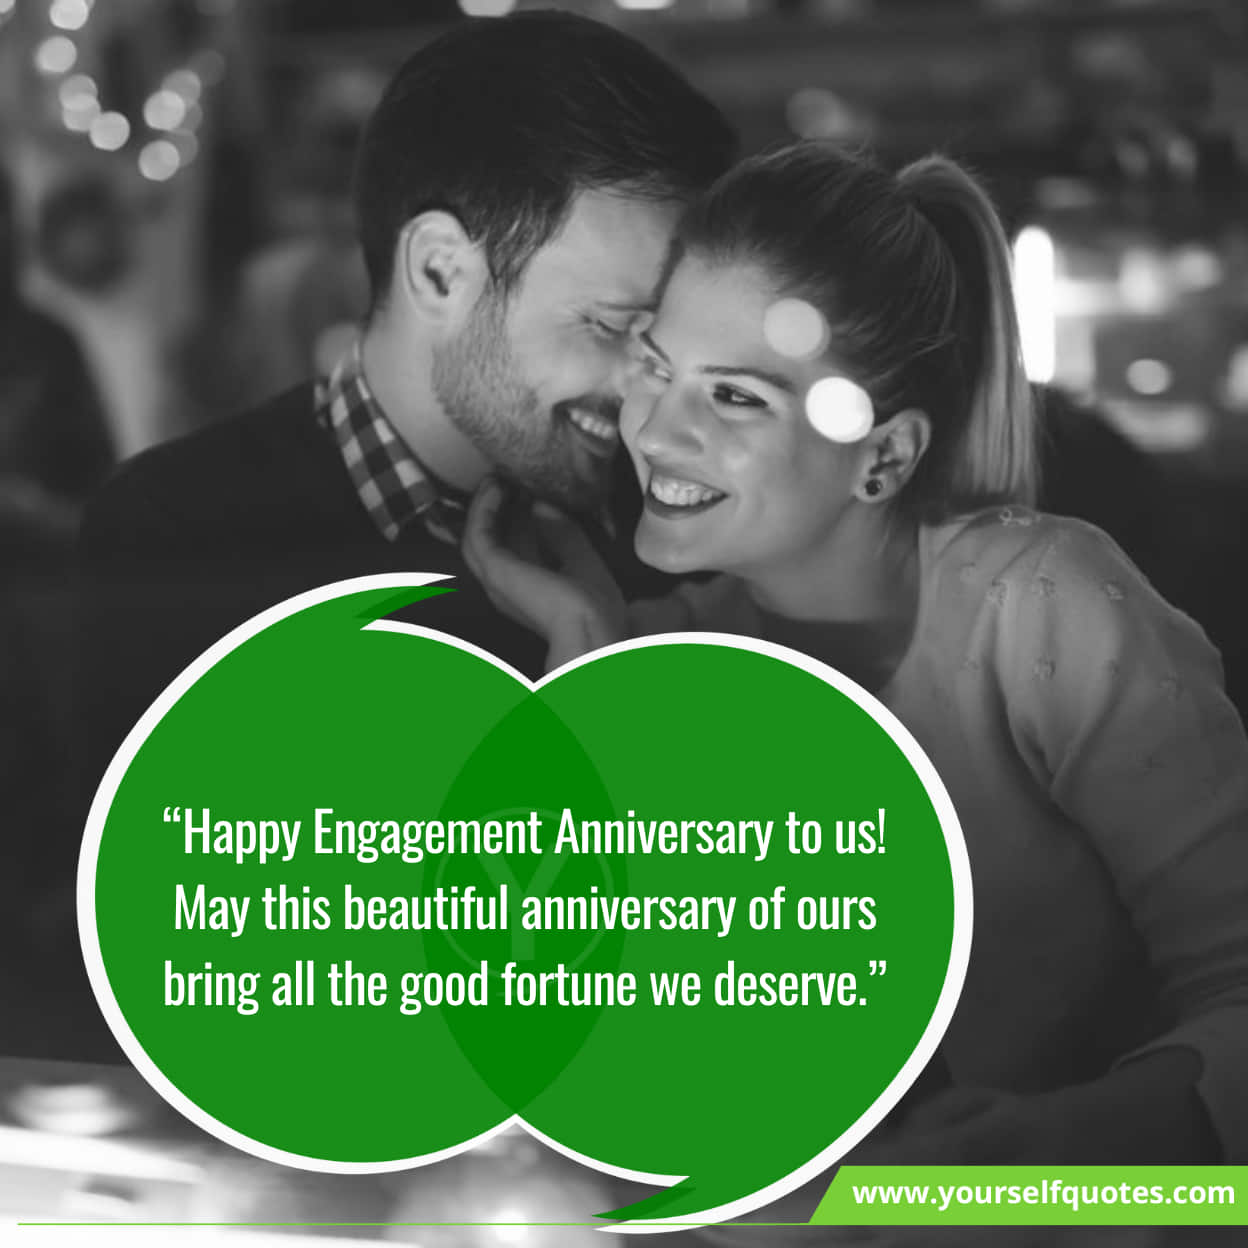 50 Congratulations Messages and Wishes for an Engagement - Holidappy